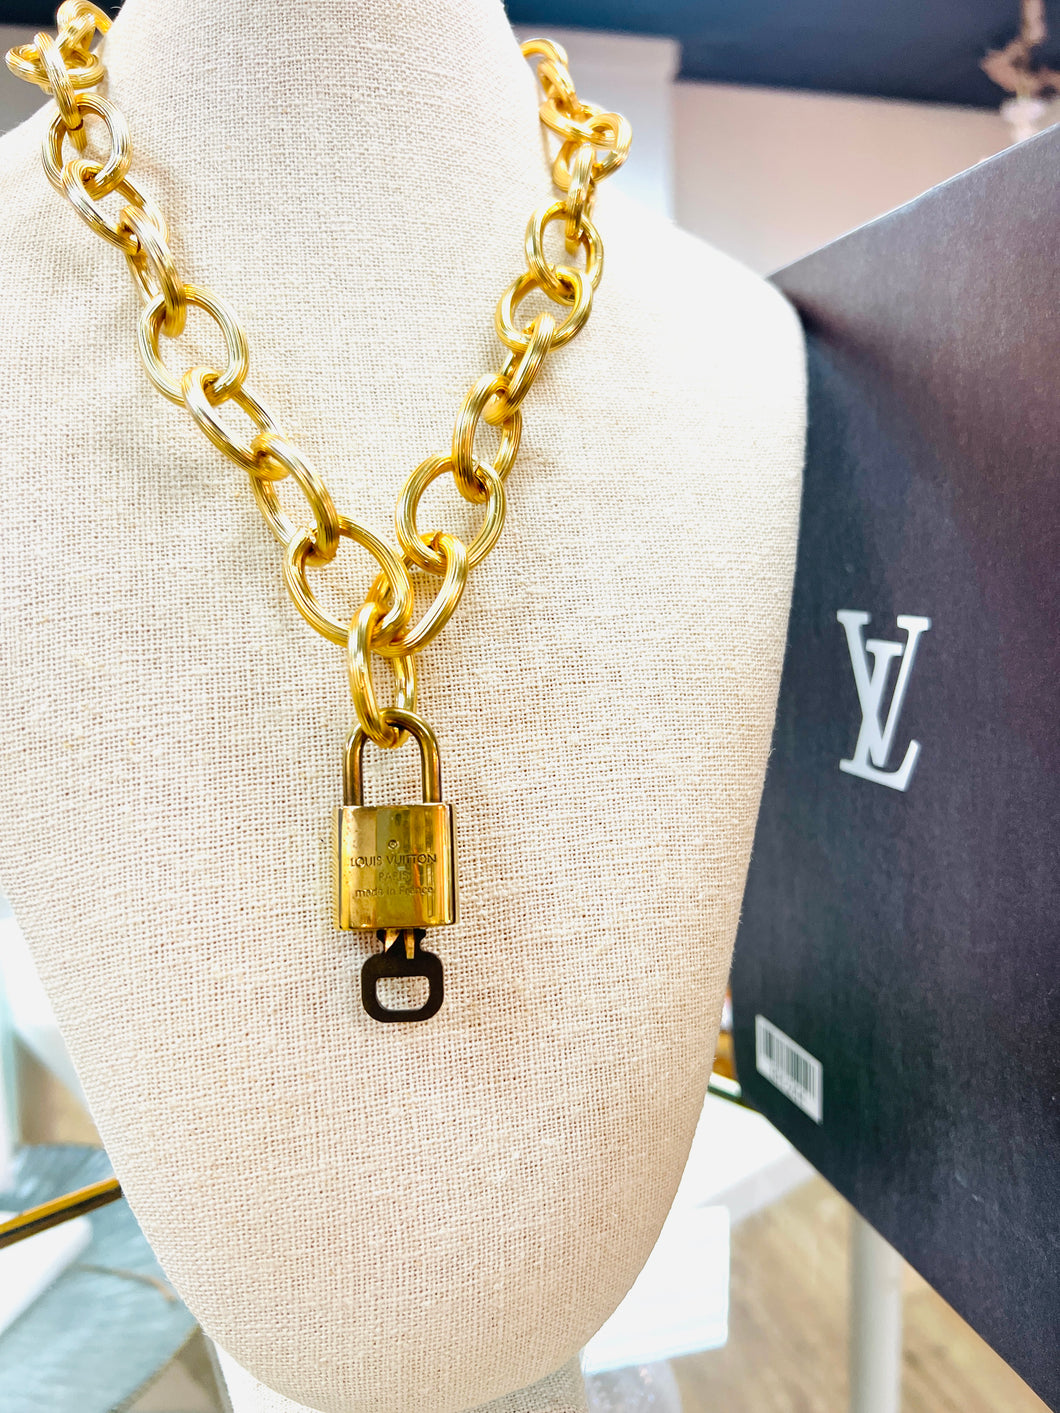 Authentic Louis Vuitton Lock/Key + Unbranded Chain for Sale in